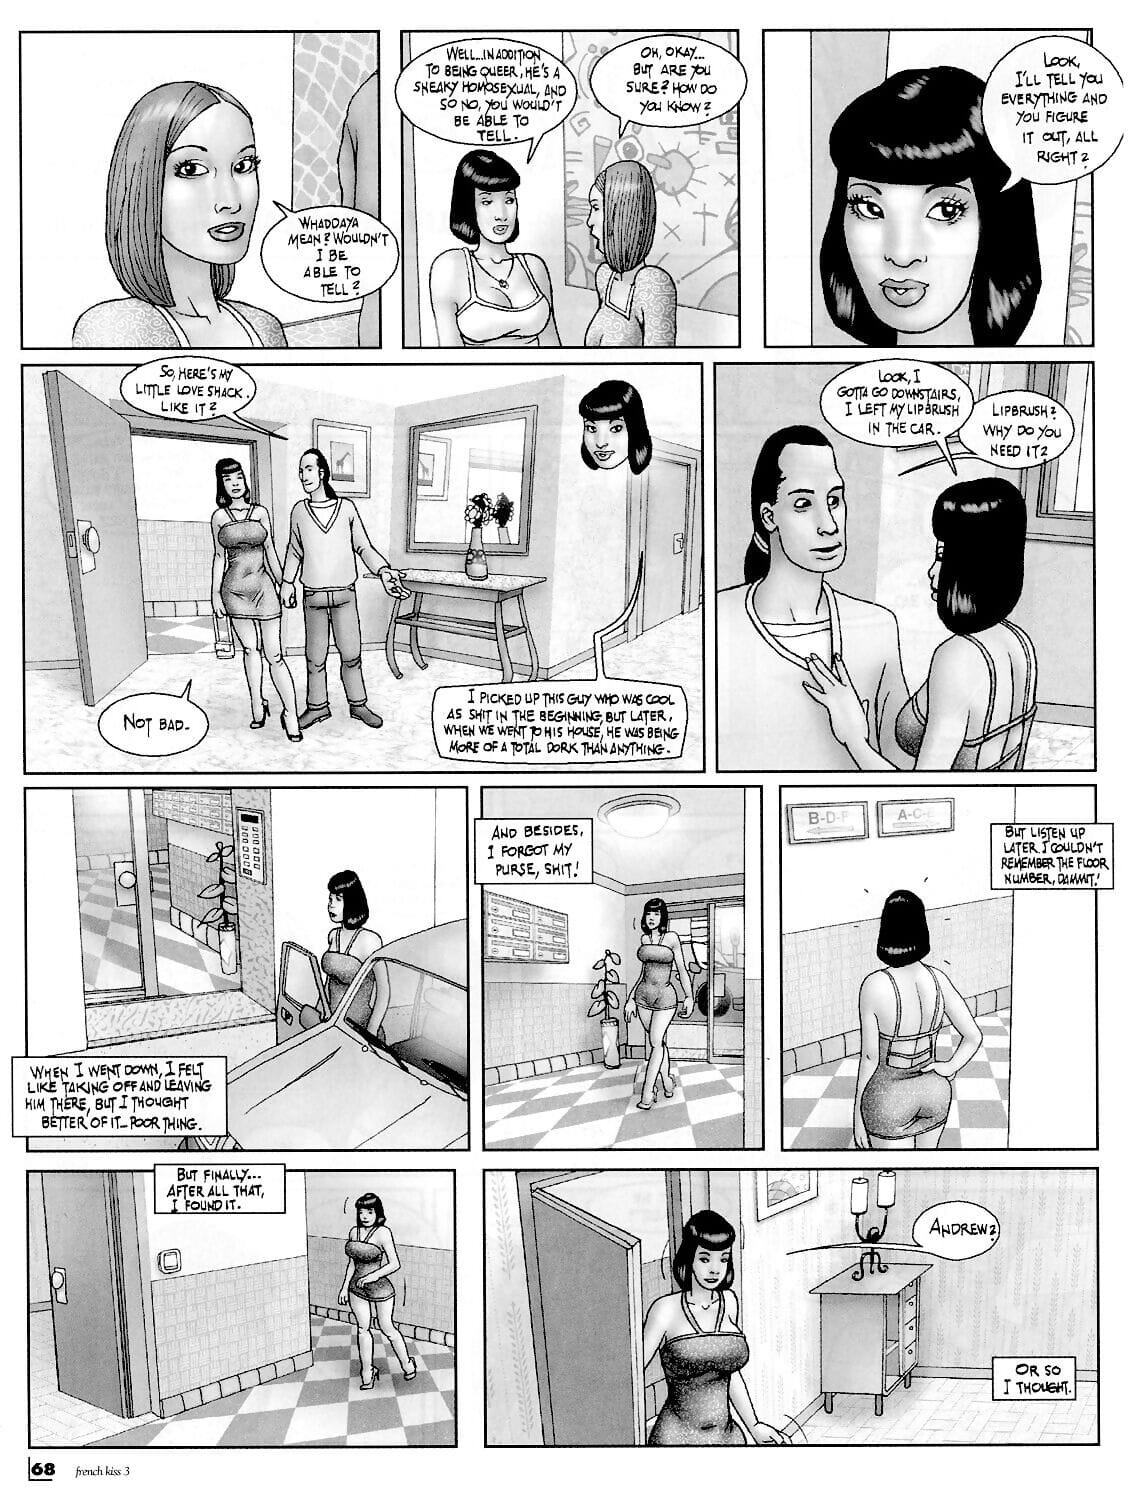 French Kiss 3 - part 2 page 1